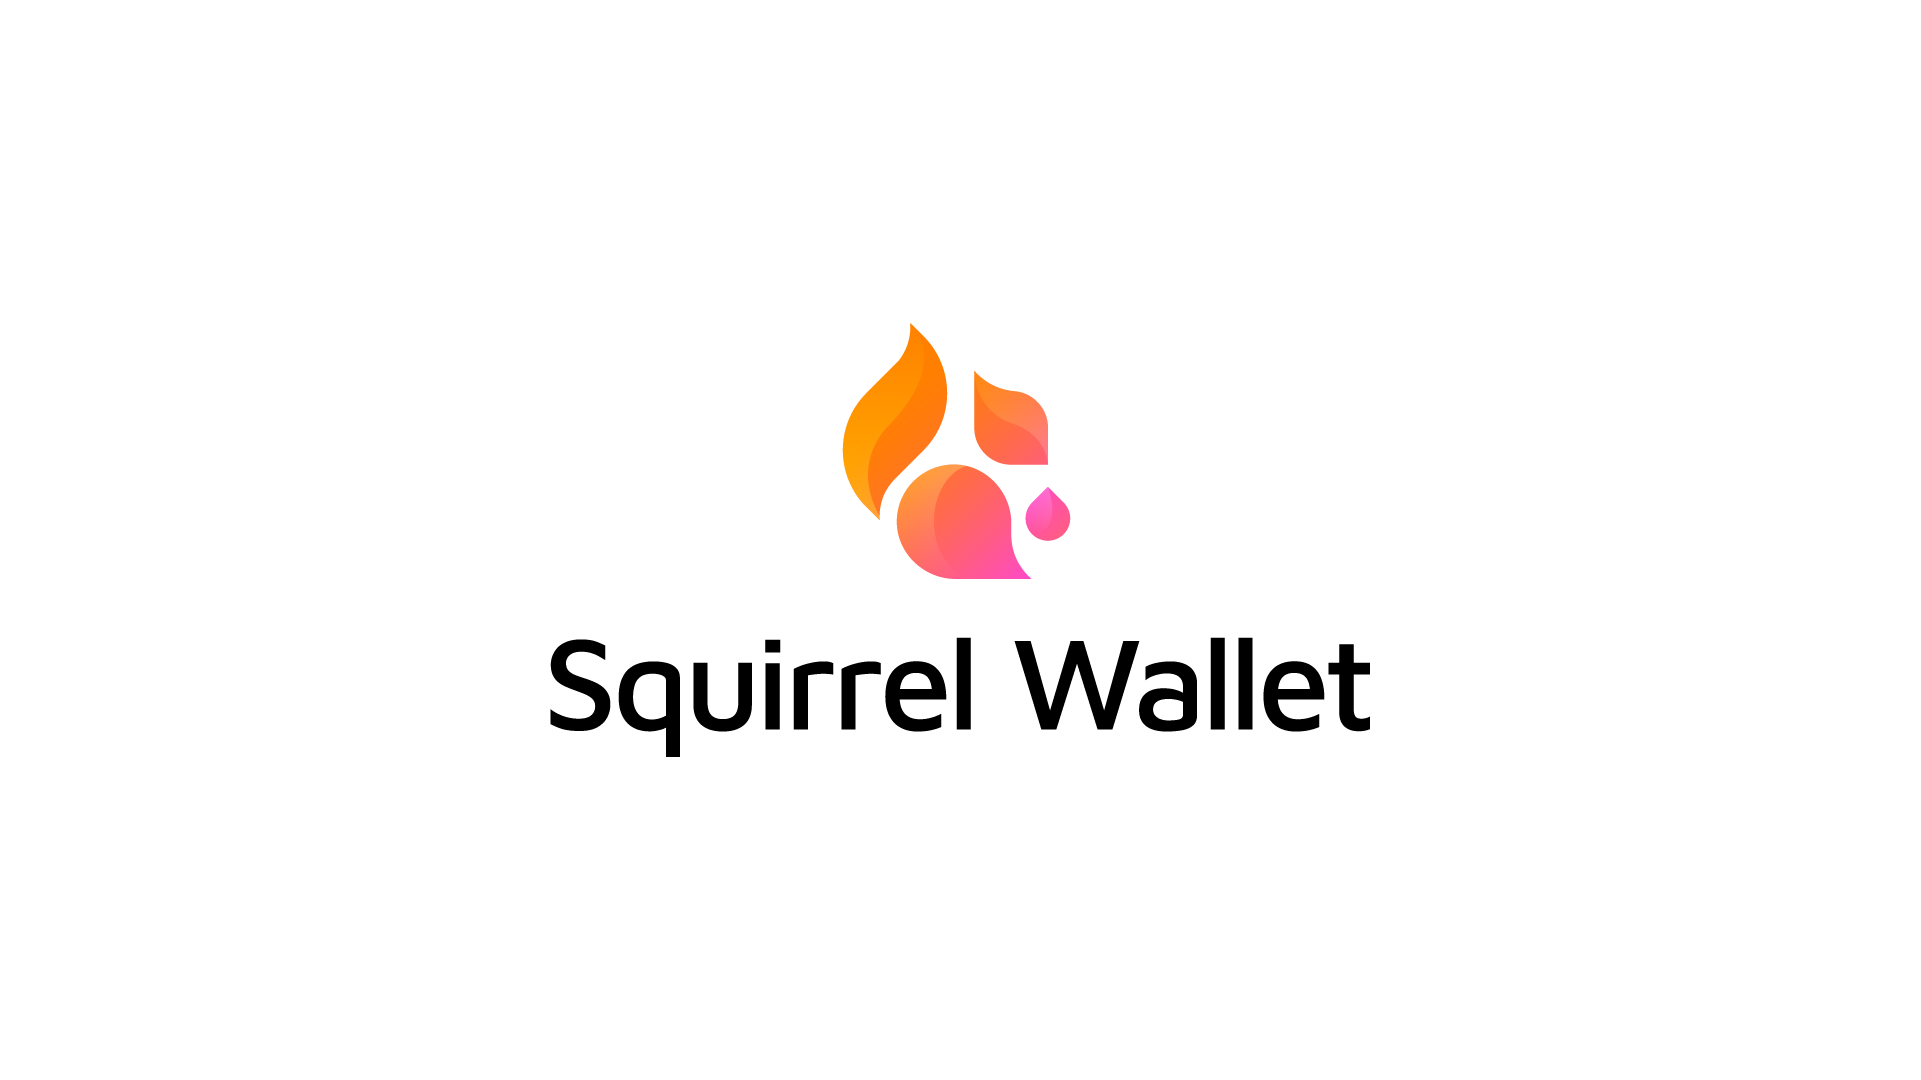 Squirrel Wallet - DeFi Crypto Wallet logo, featuring a squirrel silhouette, symbolizing security and storage for decentralized finance